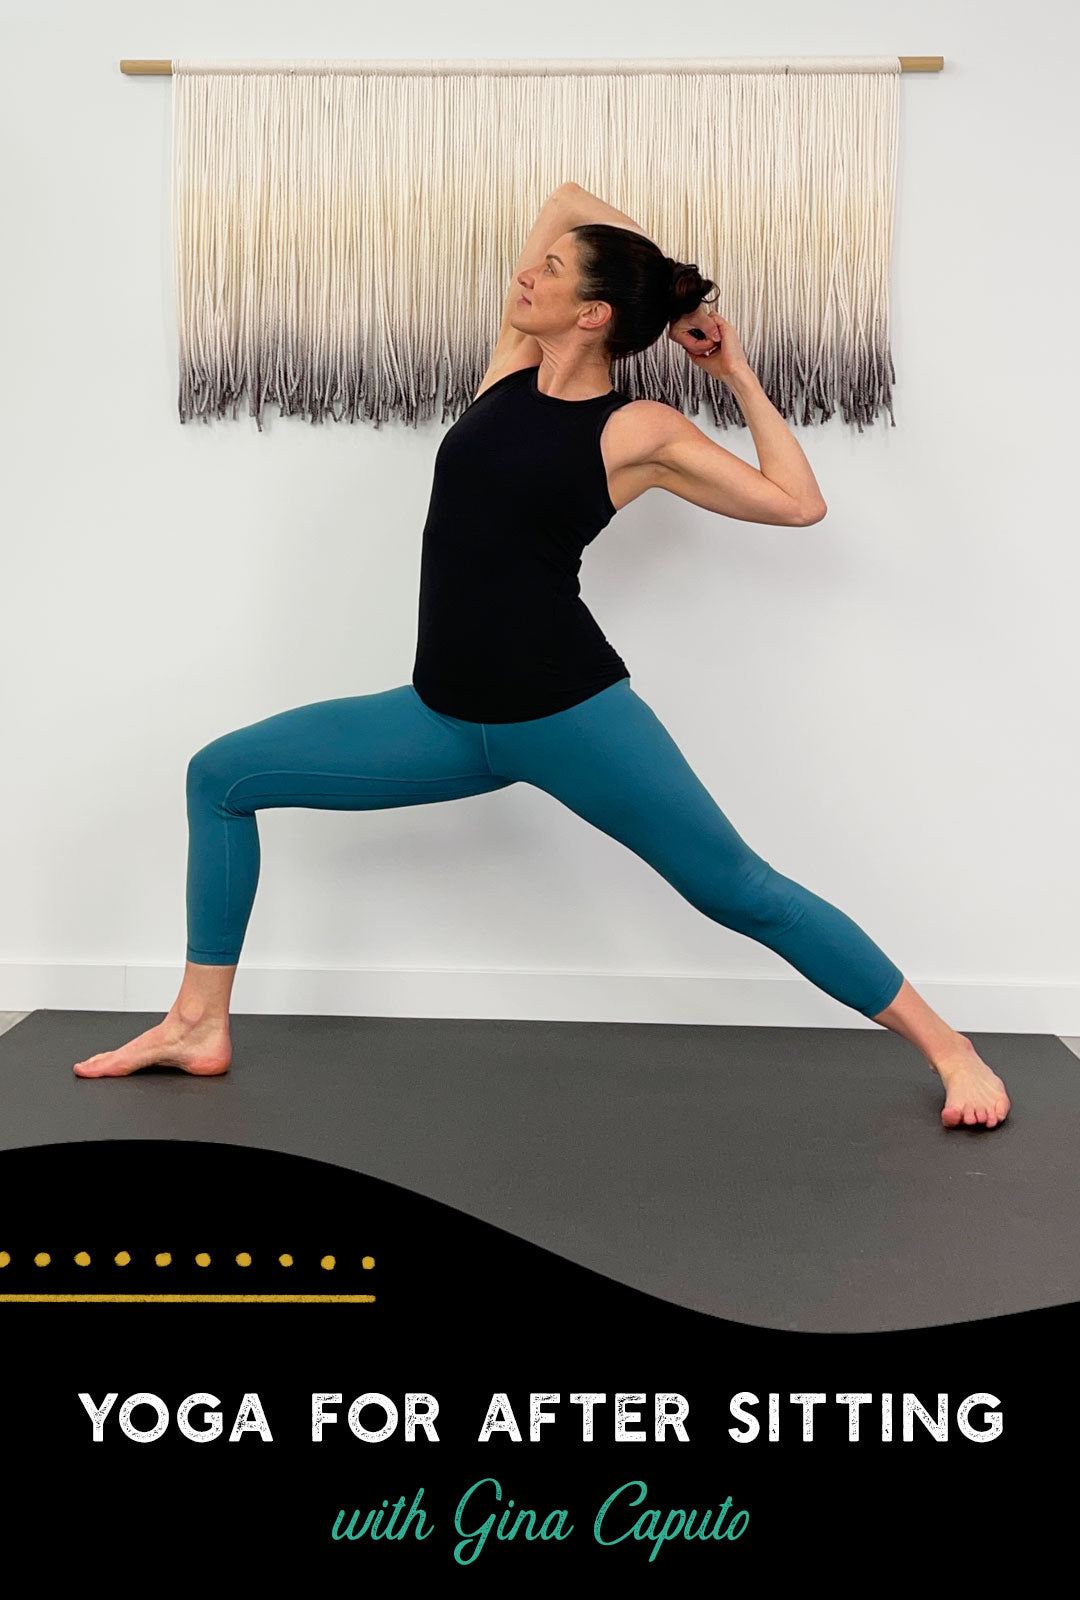 Time to slow down with Koya Webb: 3 yoga poses for runners